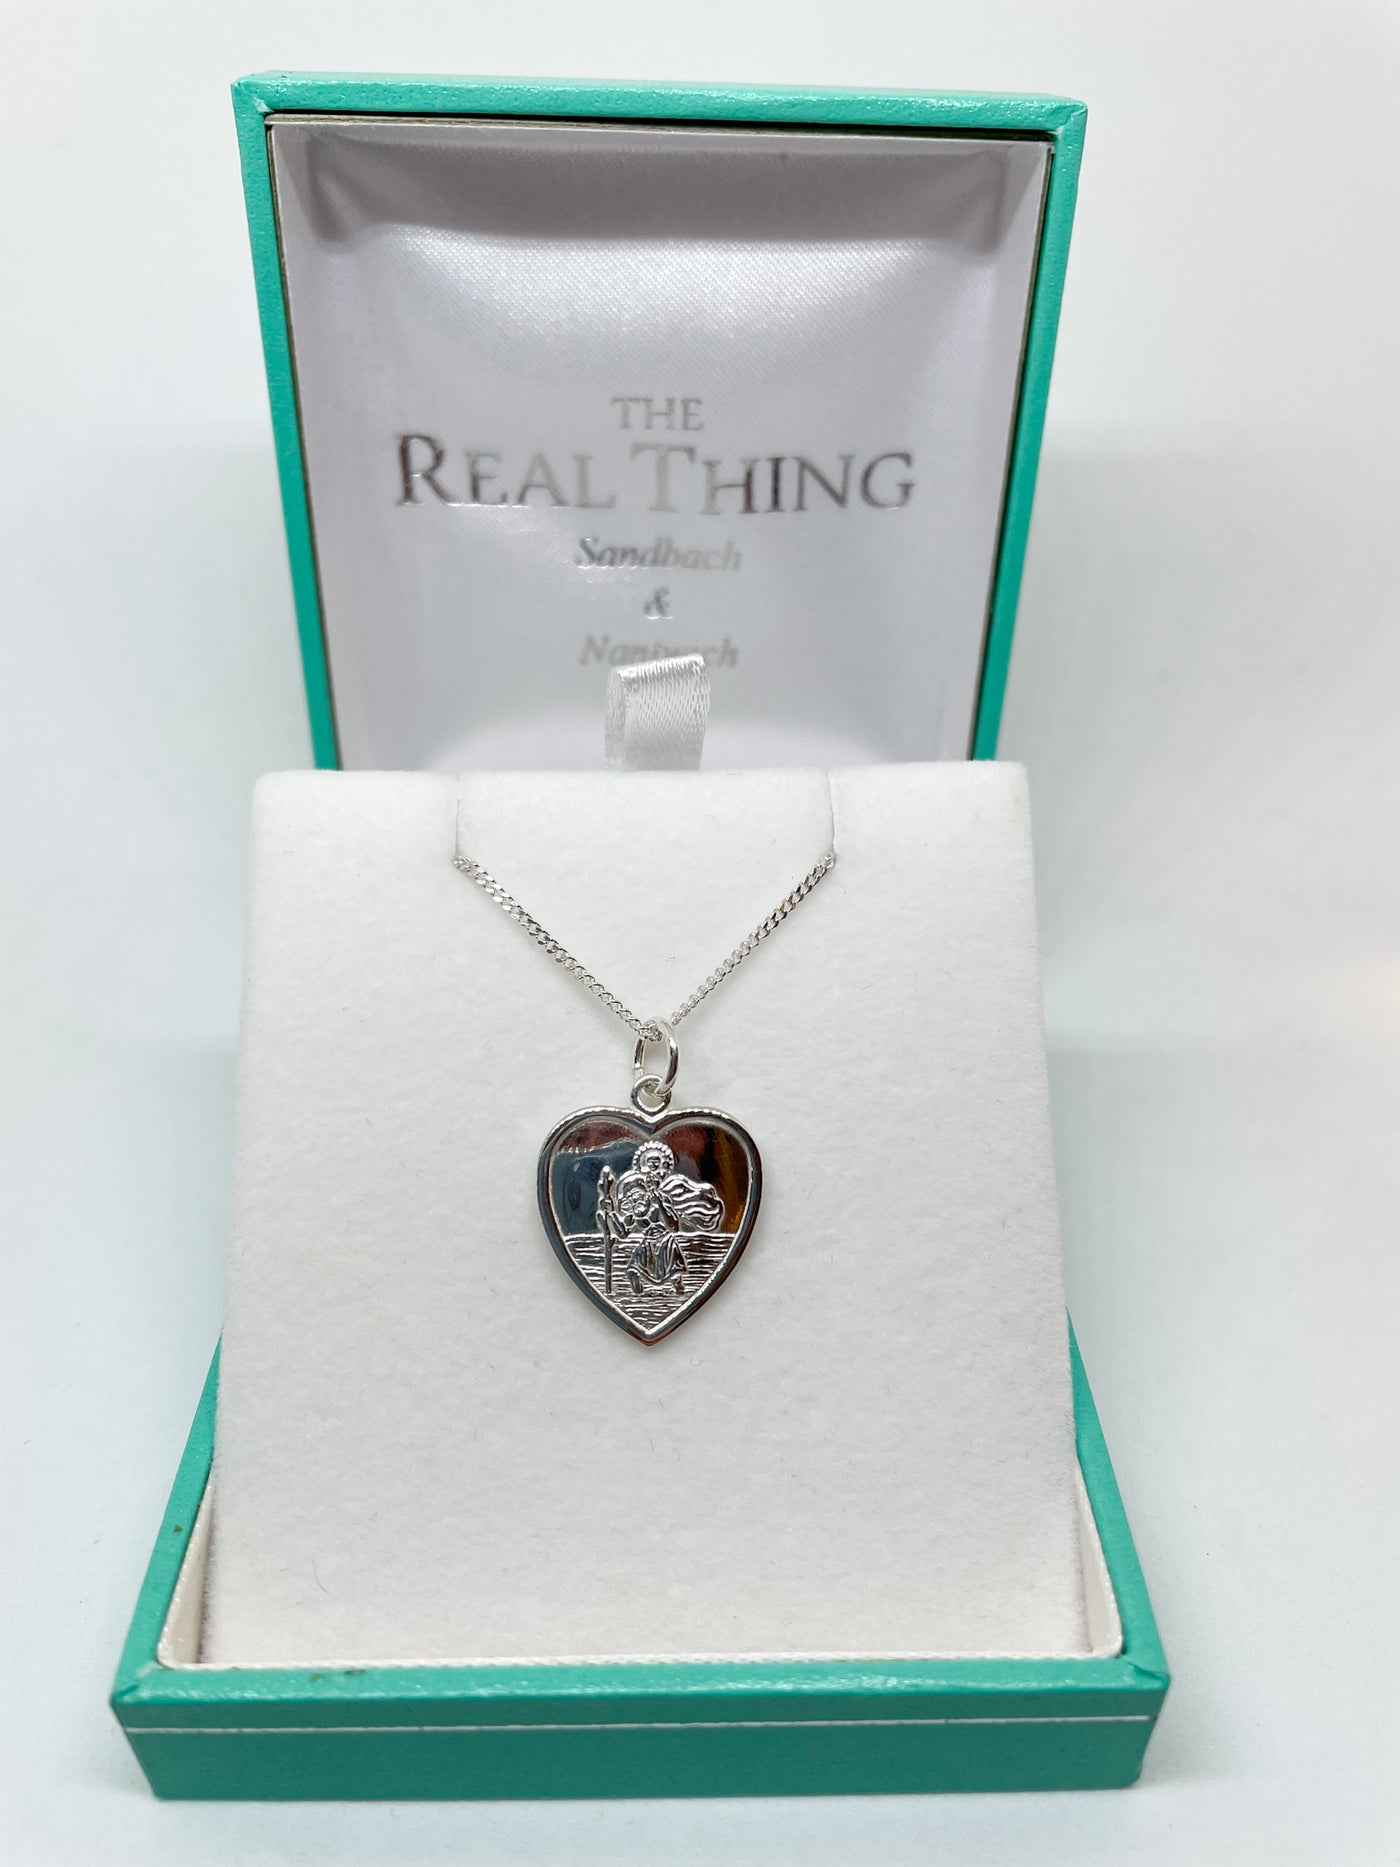 ST Christopher Heart Necklace